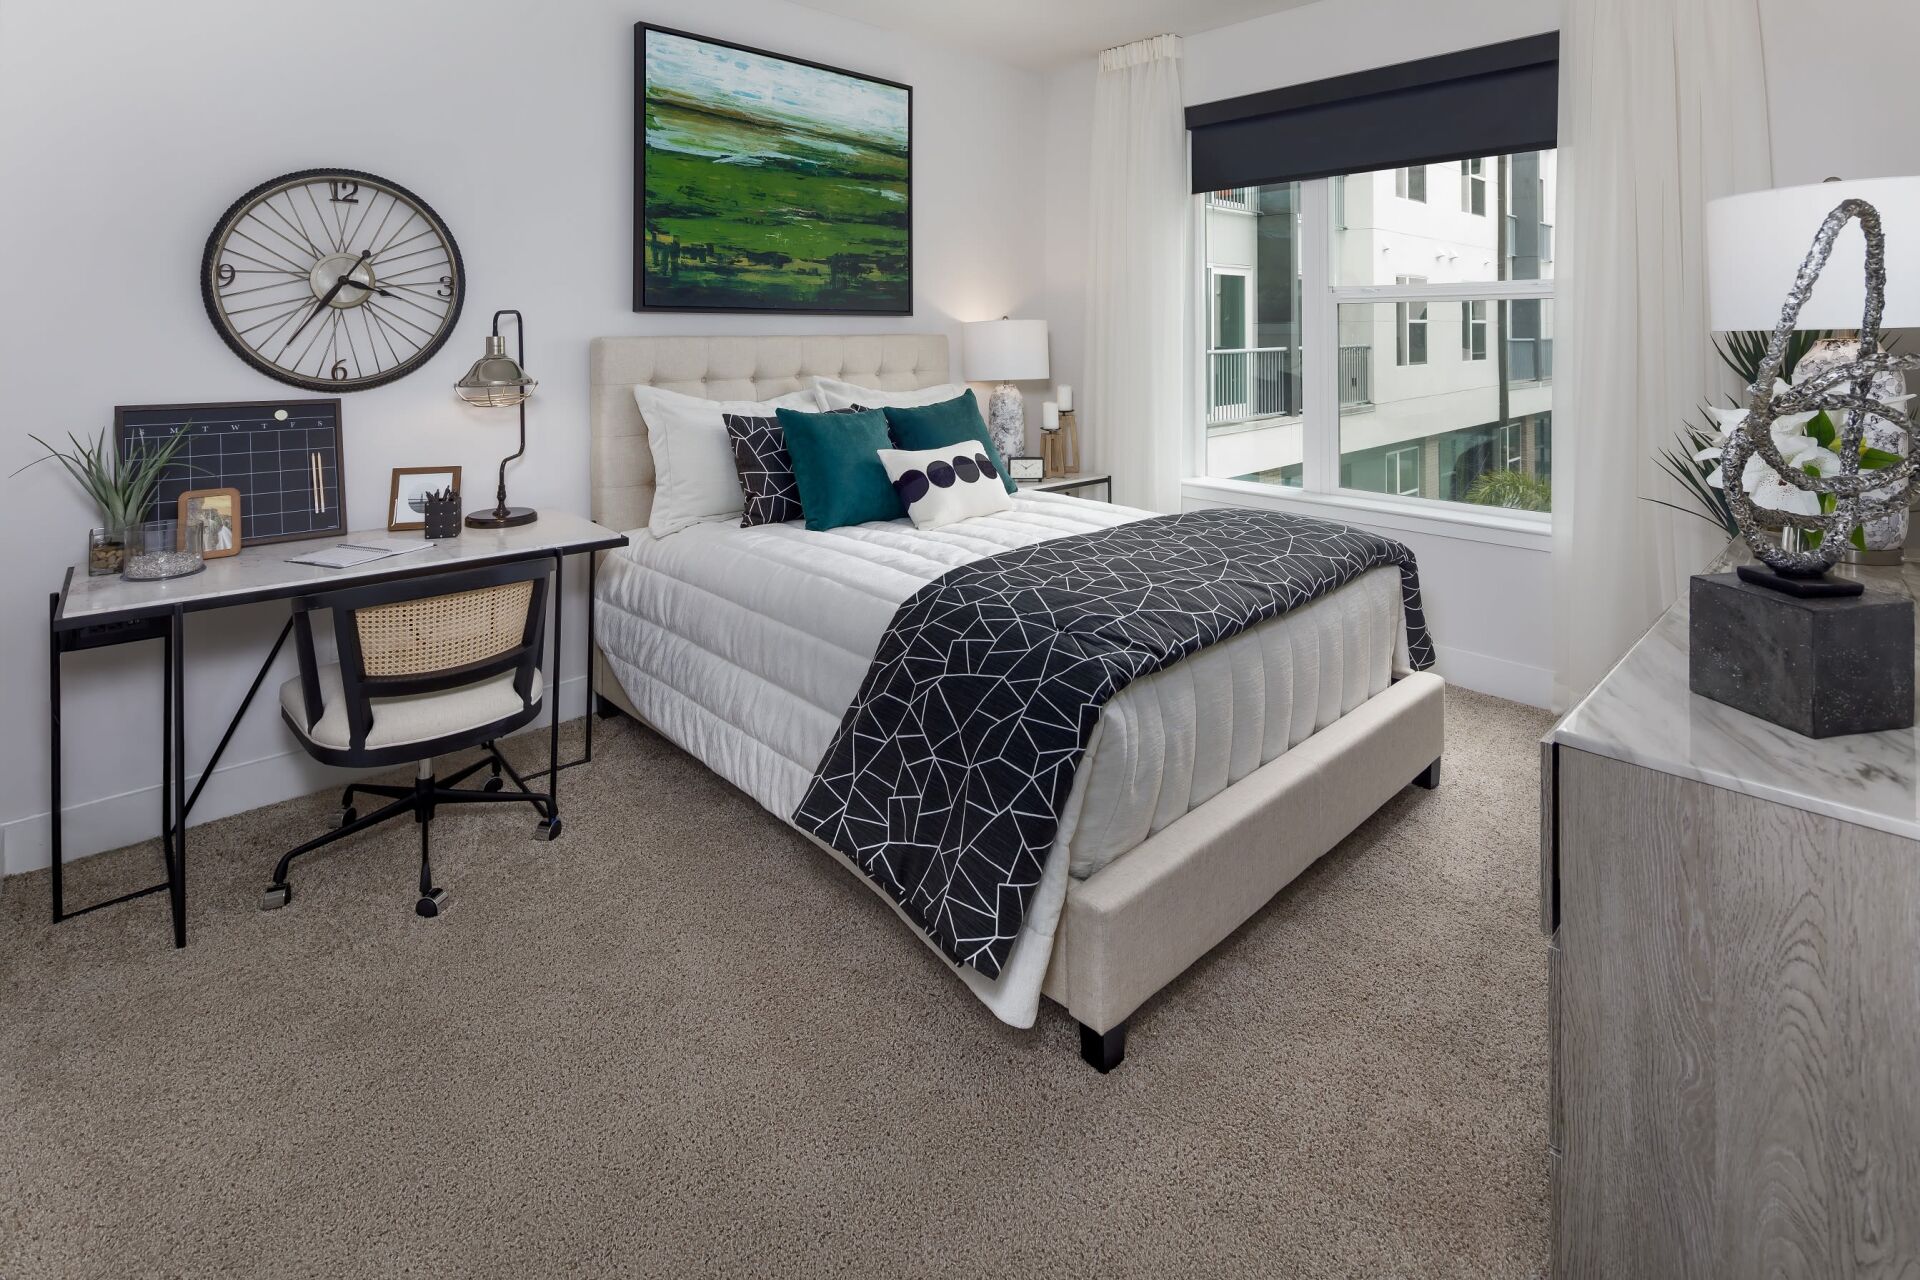 Central Station on Orange | Spacious Bedroom with a Working Area, Bed, and Large Window